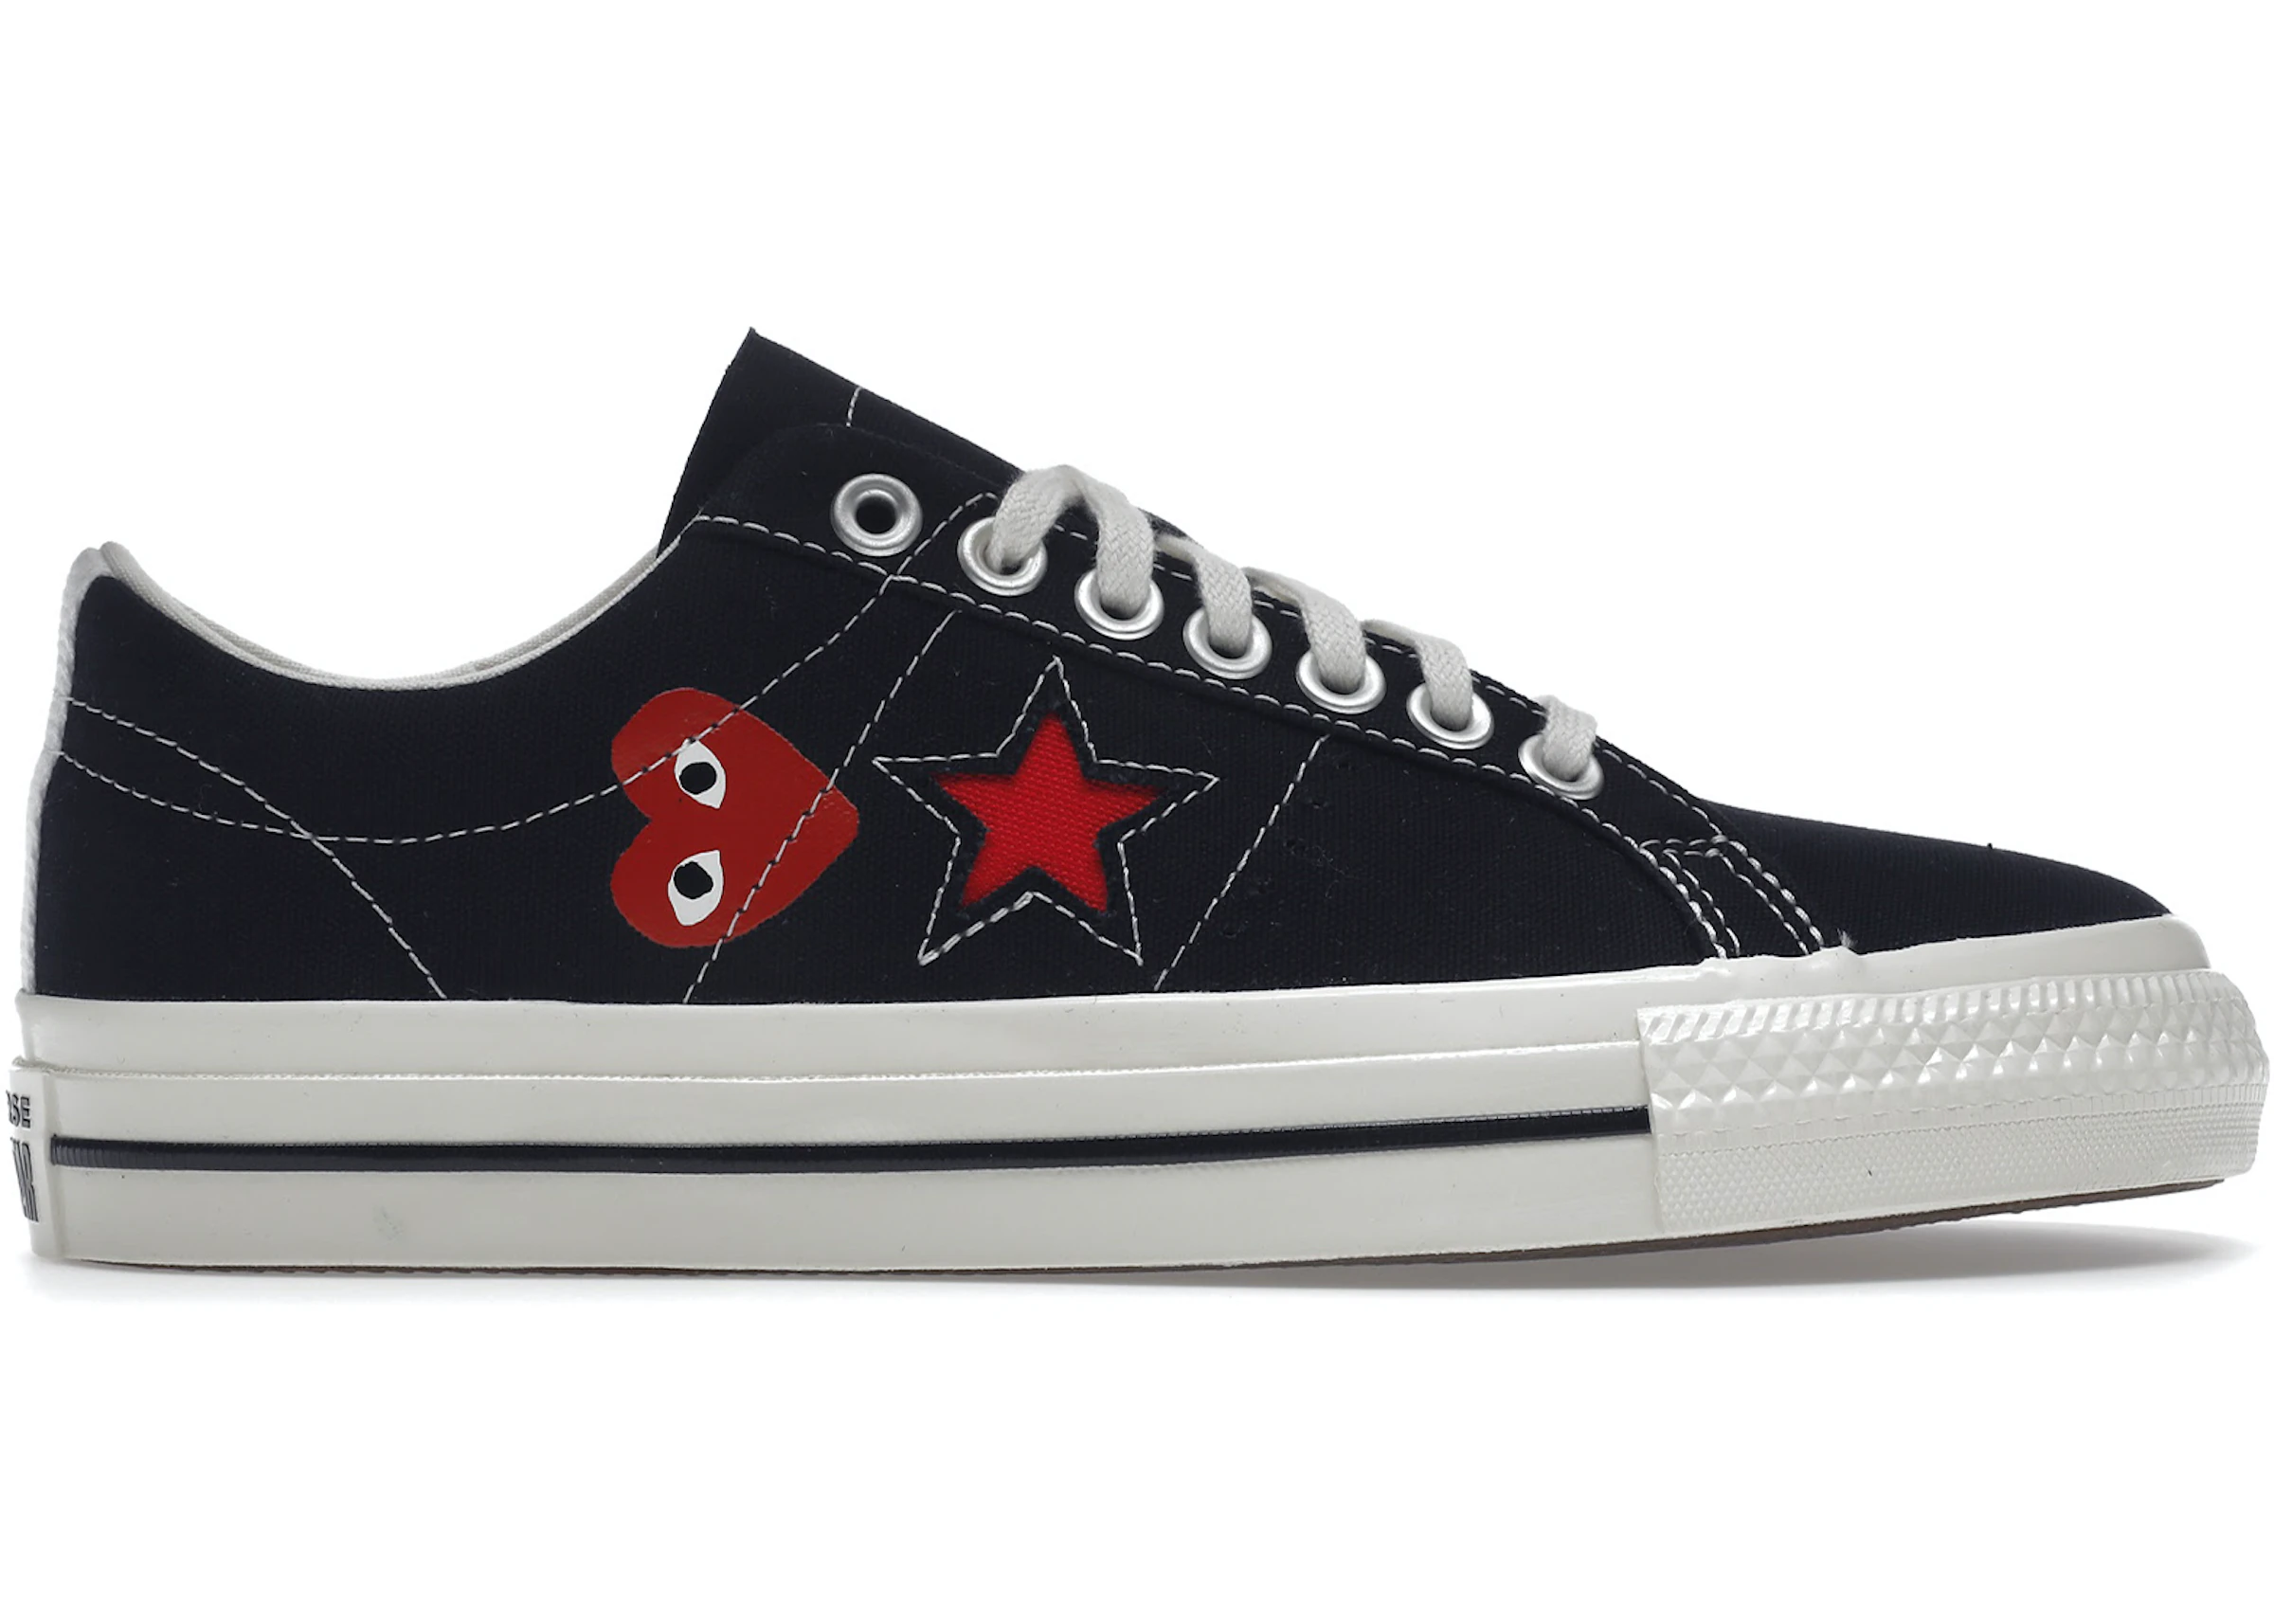 Converse One Star Ox Comme PLAY Black - A01791C - US